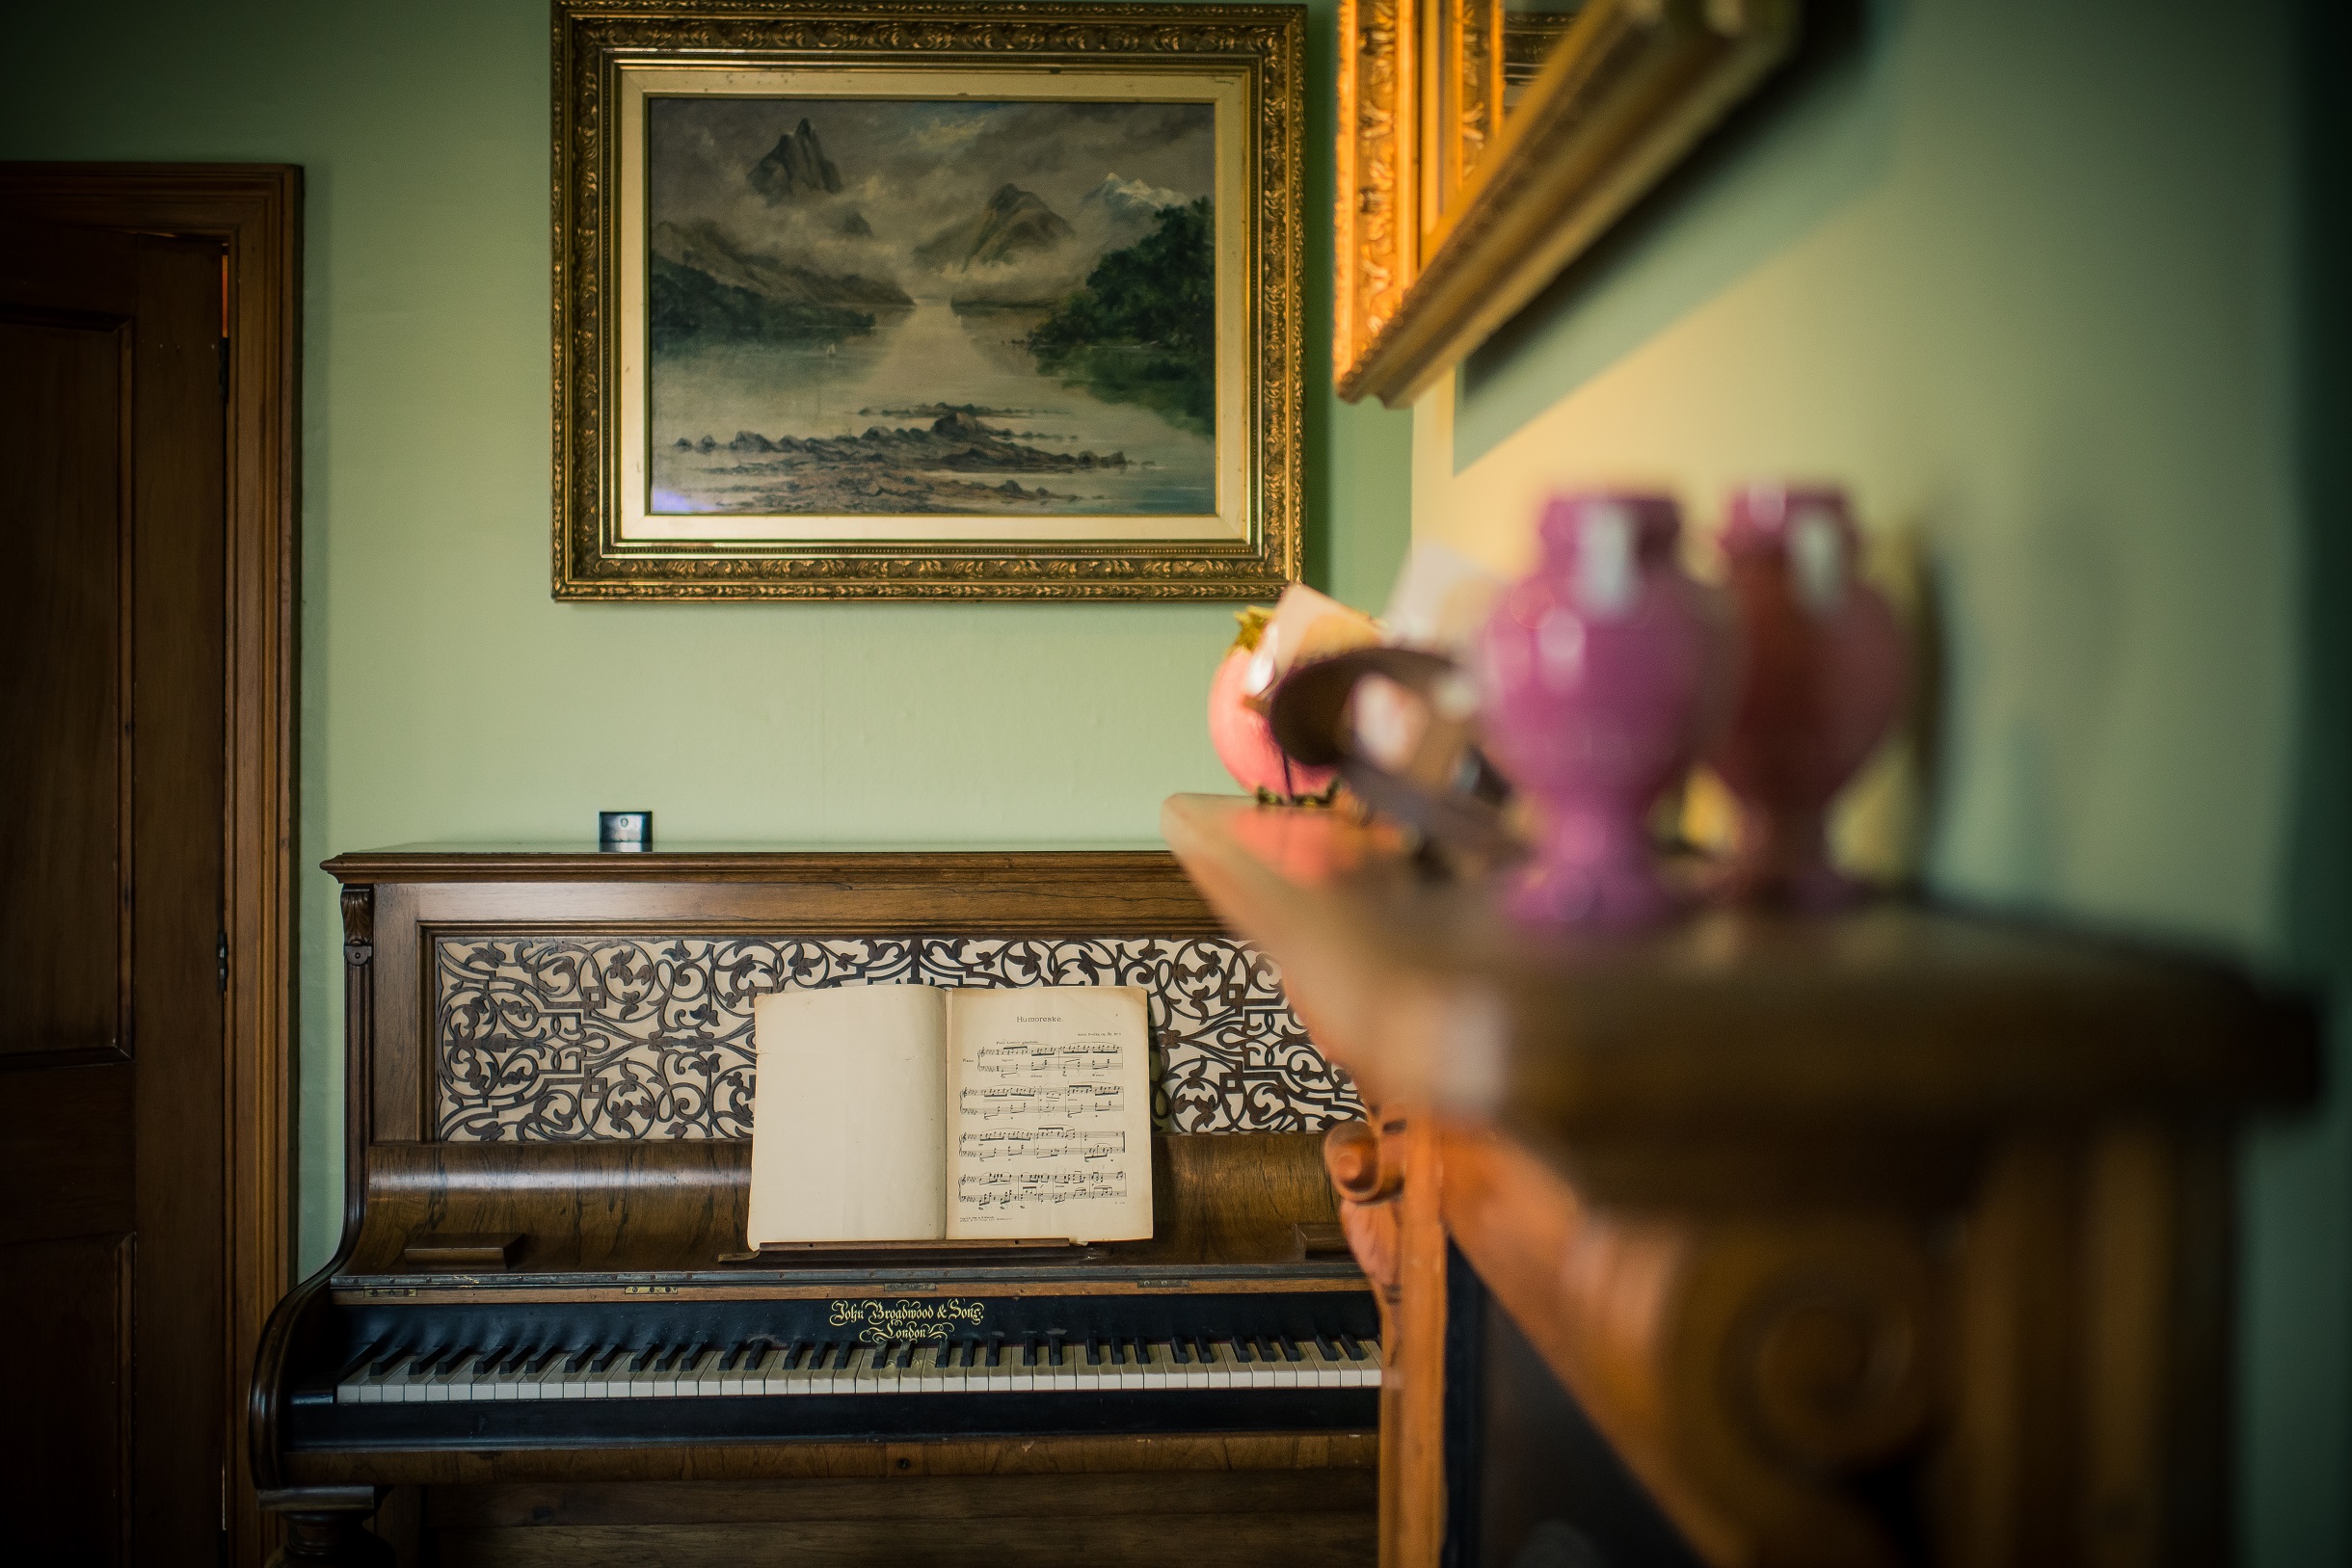 The pianola of the sitting room is against the pale green wall. The mantel piece in the foreground hold trinkets and is out of focus.